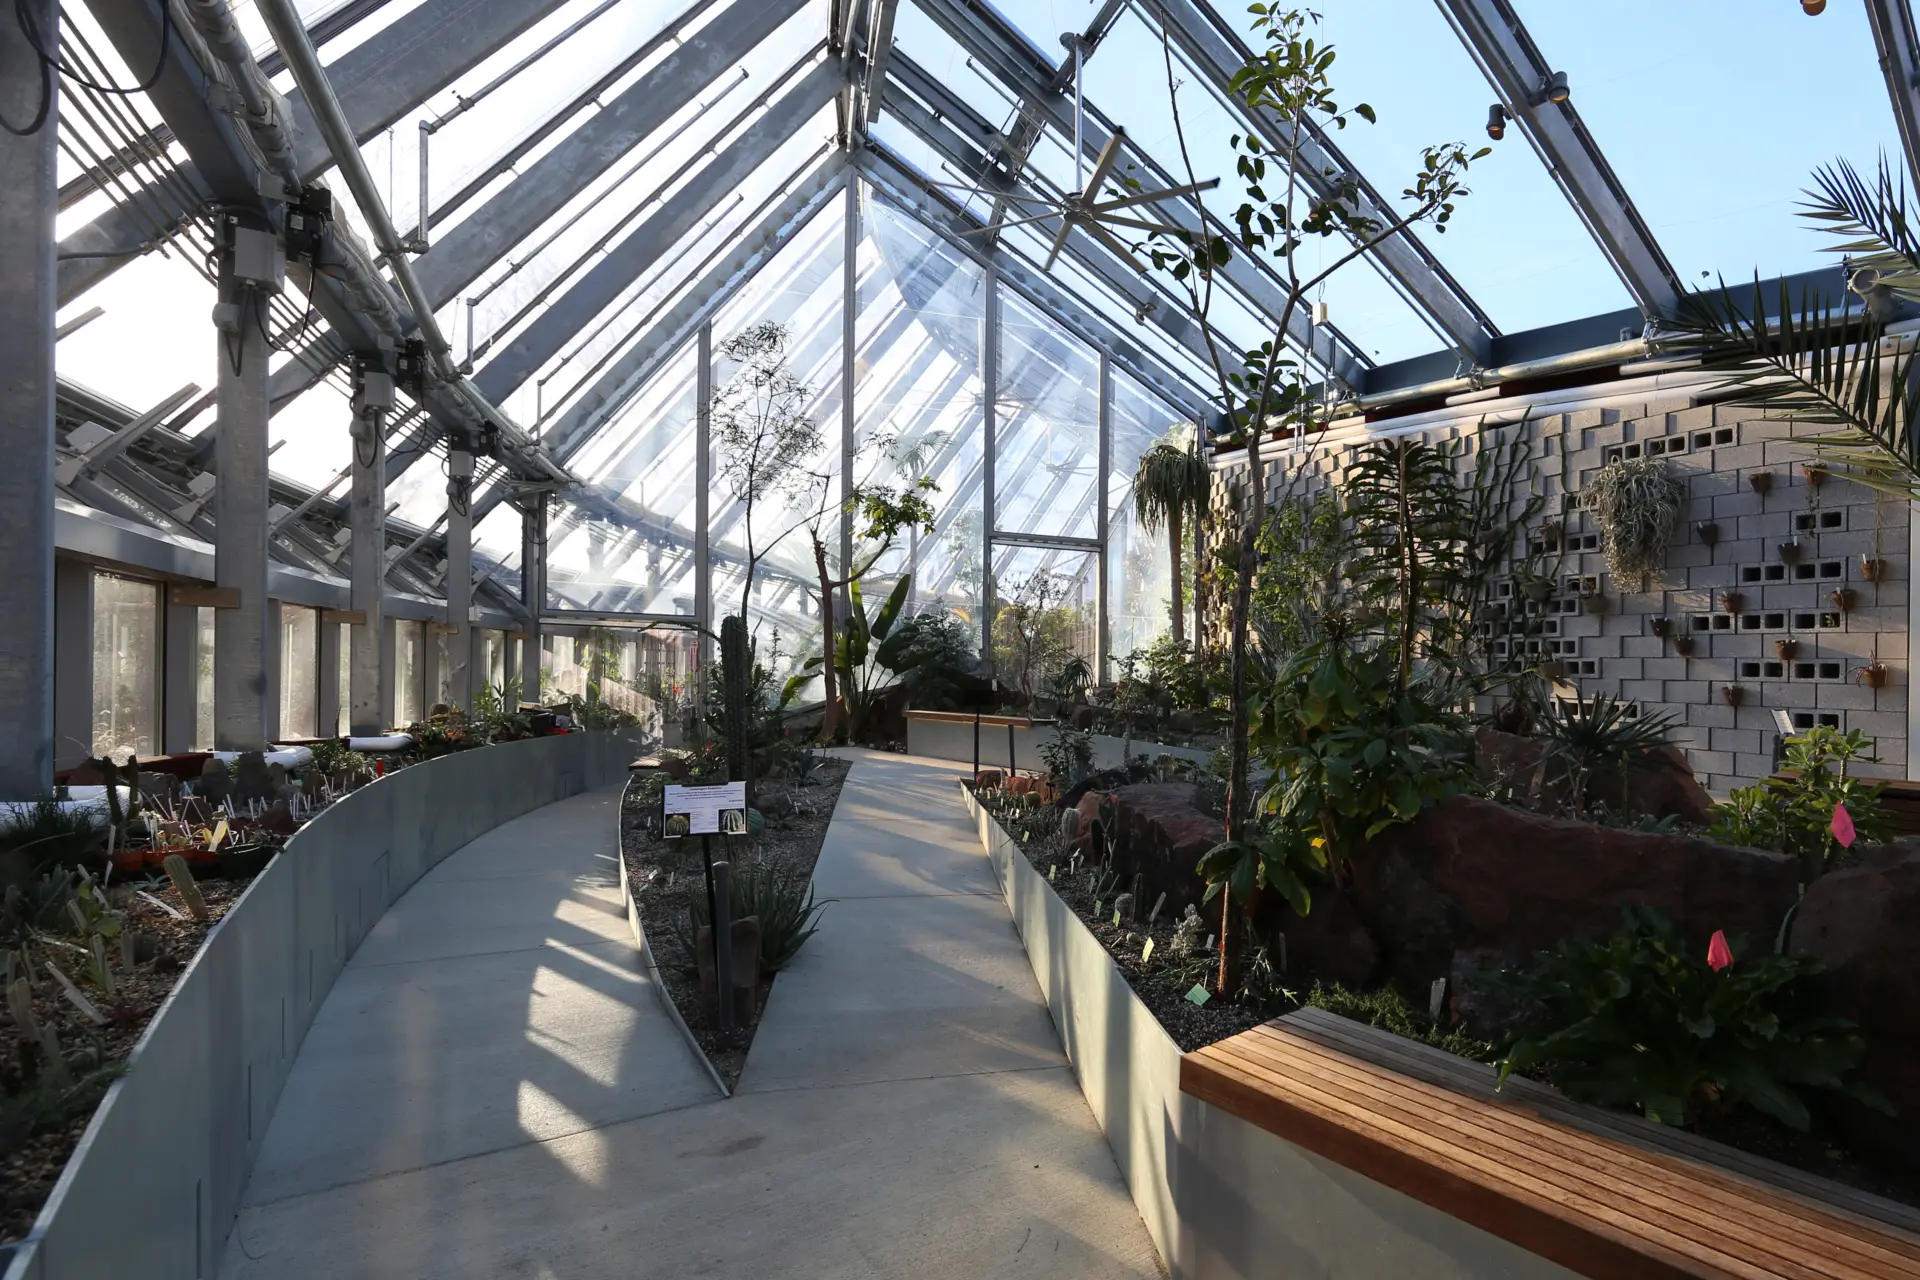 Global Flora at Wellesley College has reinterpreted the design of a sustainable greenhouse with a Texlon ETFE roof and walls.